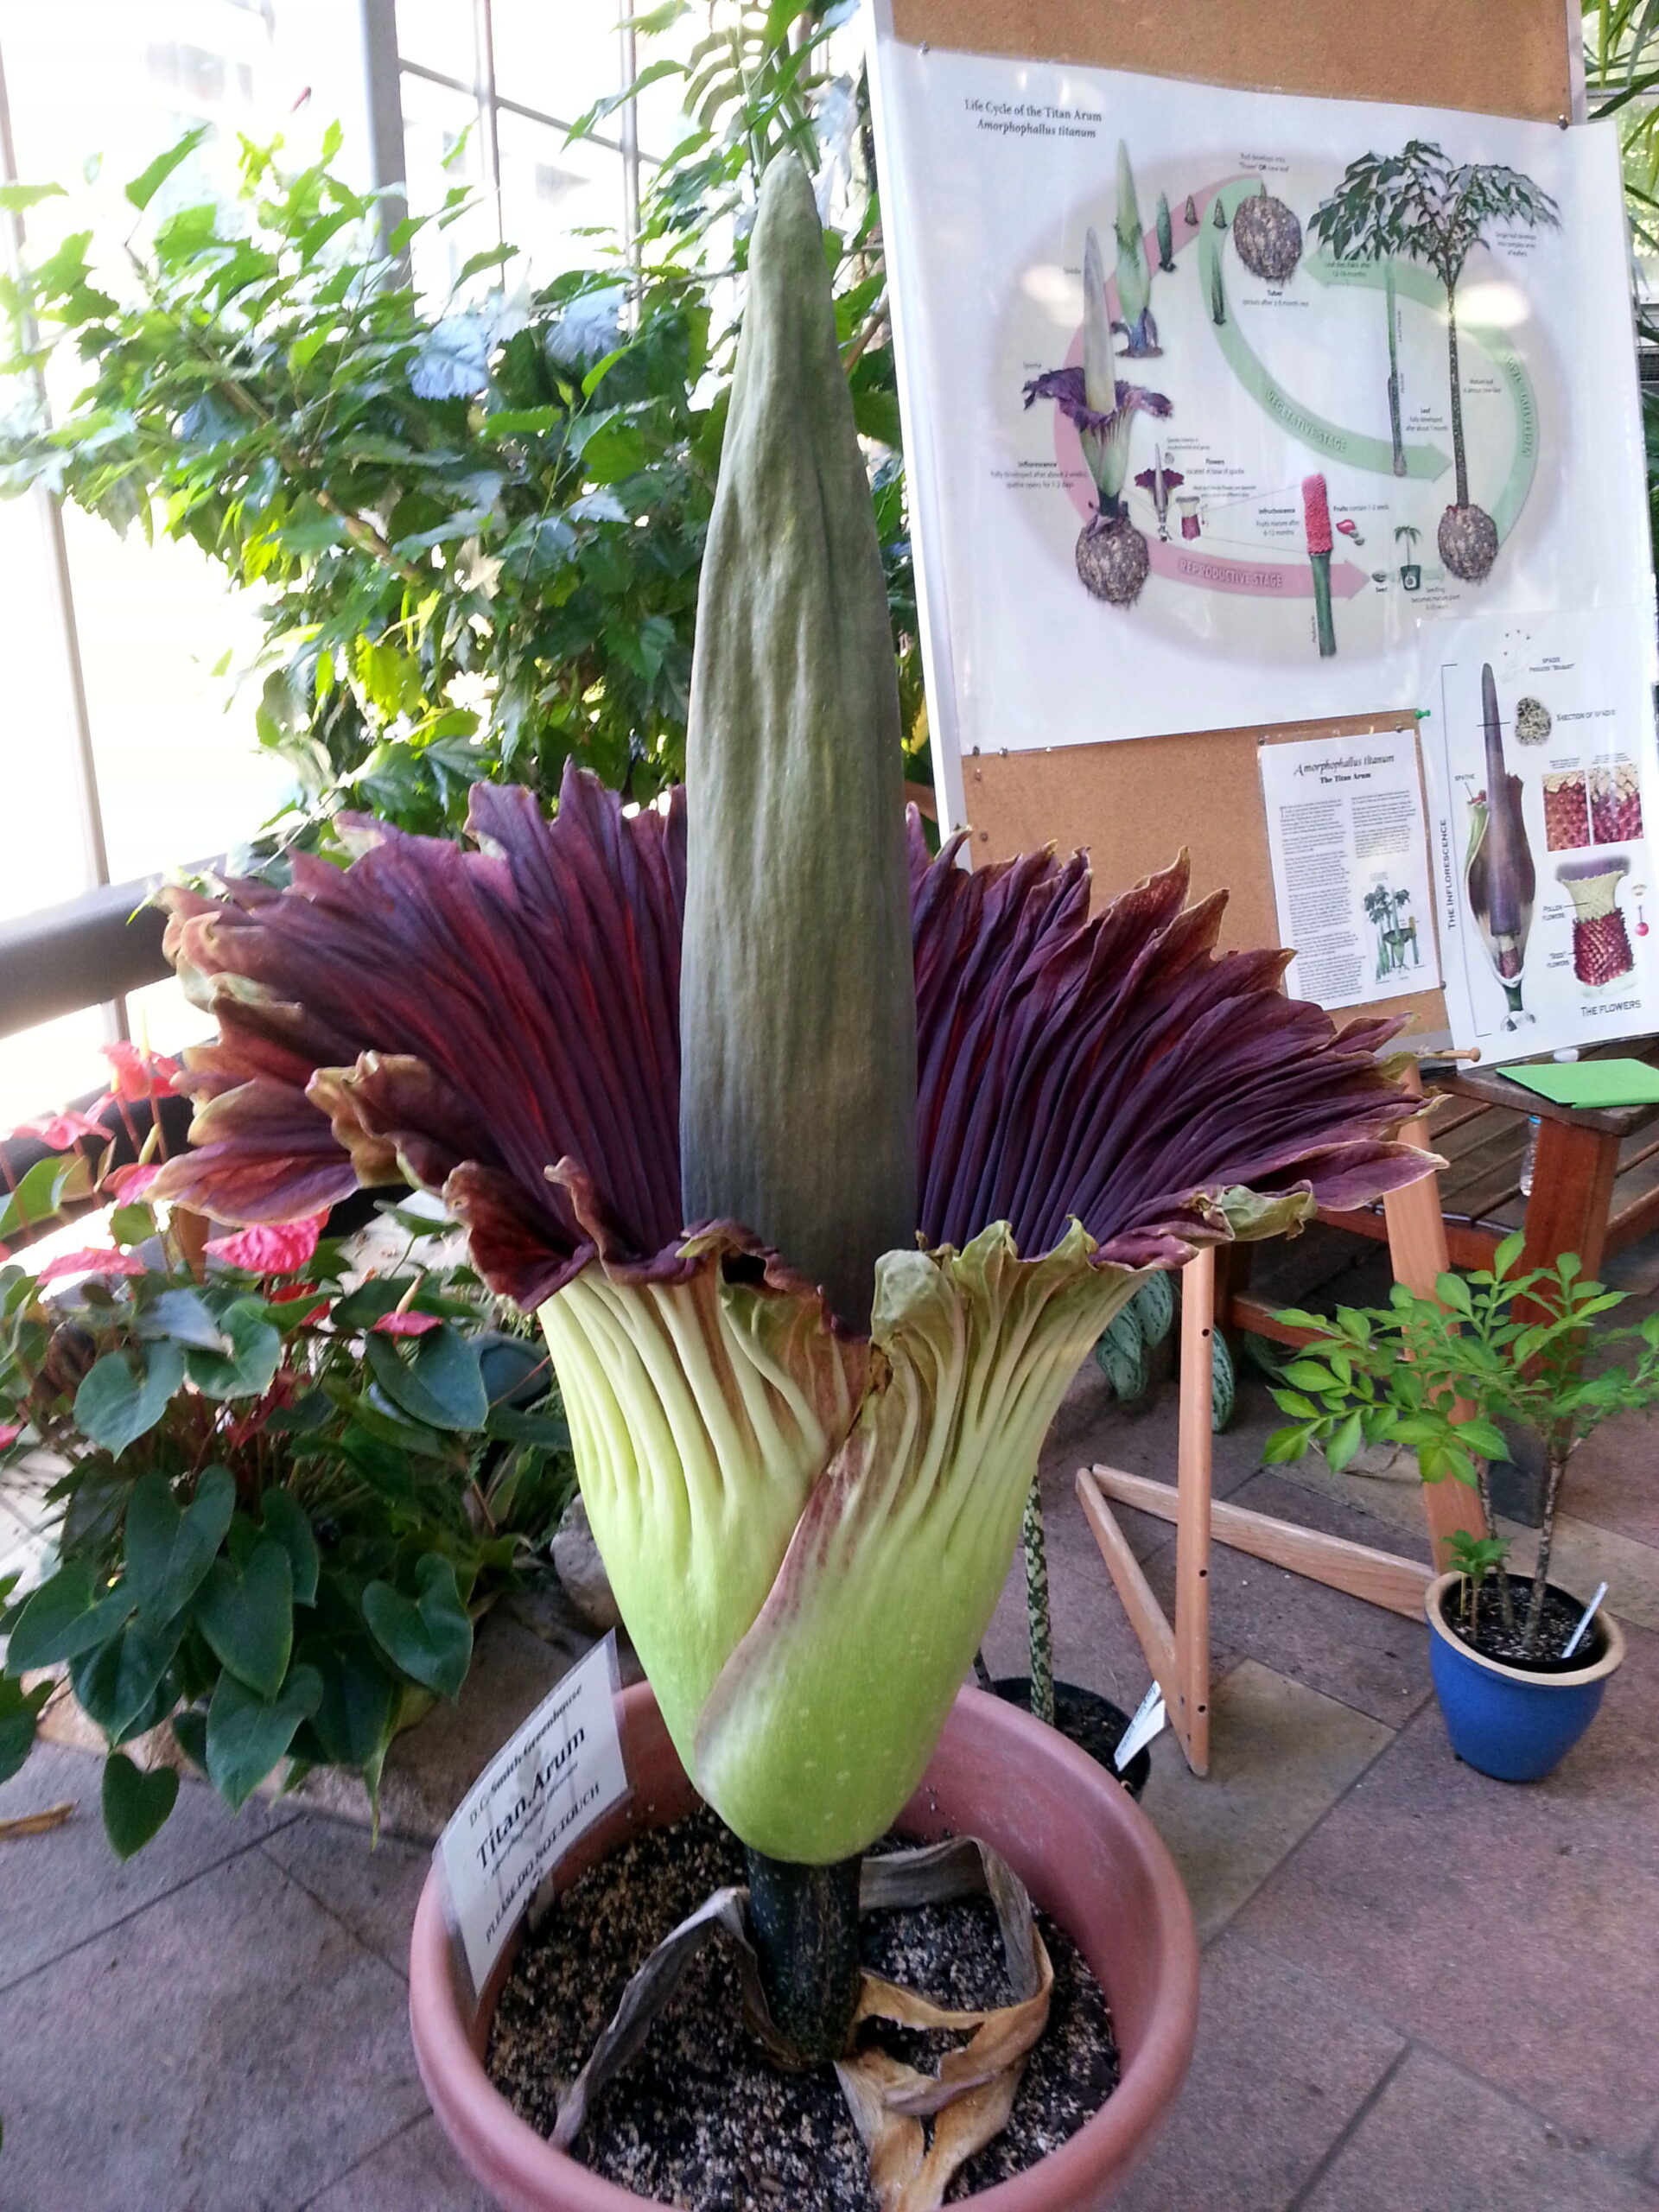 ‘Corpse Flower’ In Bloom At UW-Madison Greenhouse